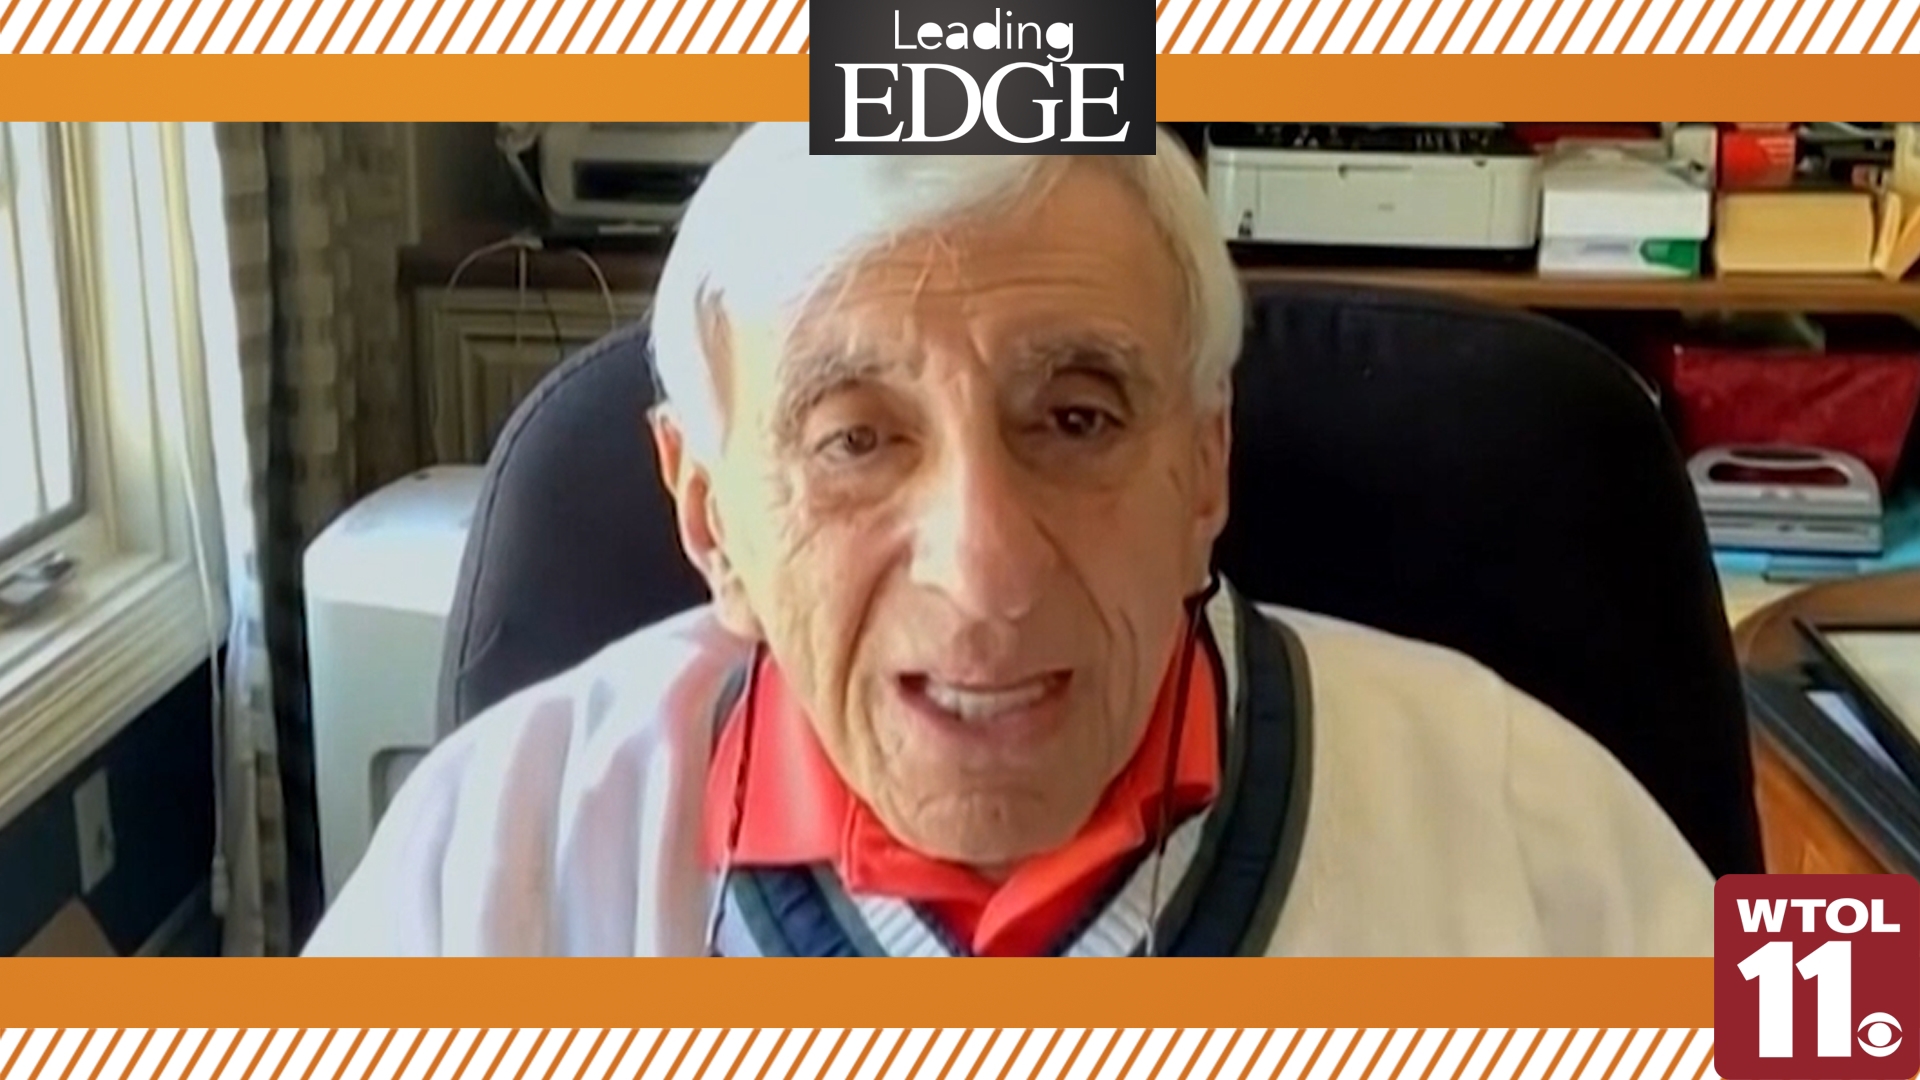 Jamie Farr, well-known to Toledoans for his years on the hit television show M*A*S*H, as well as the professional women's golf tournament that bore his name, is 90.